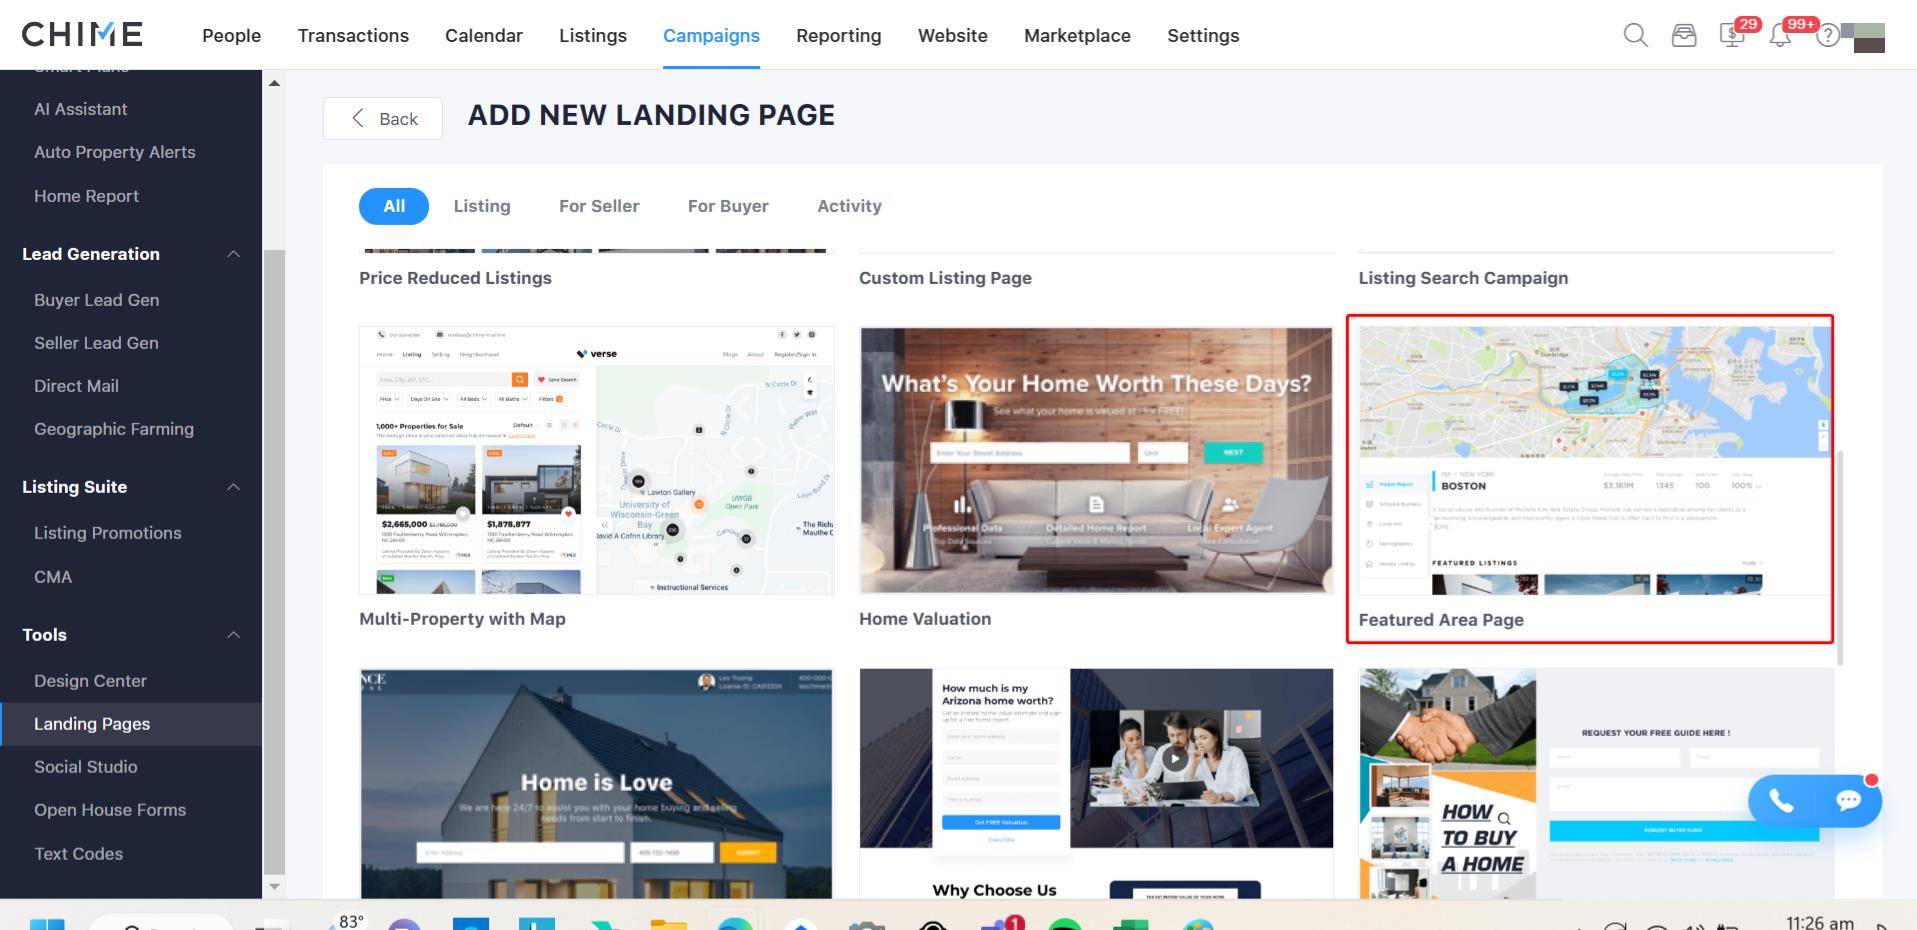 landing_page_featured_area.jpeg